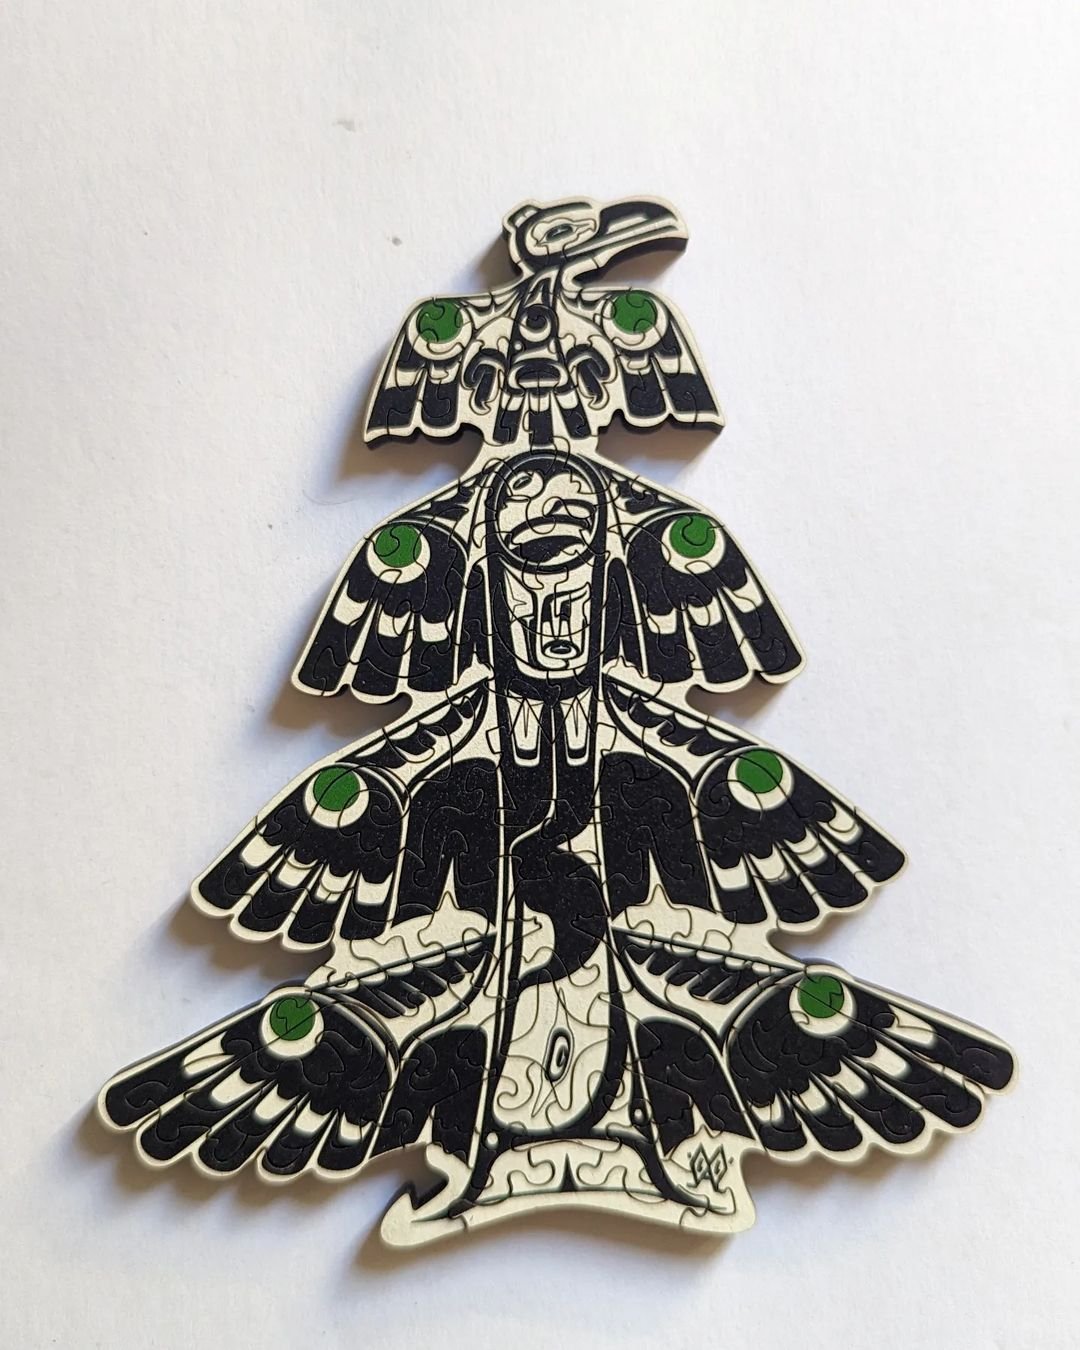 Pin with bird charm, green eyes, part of Puzzle Piece Tree collection.